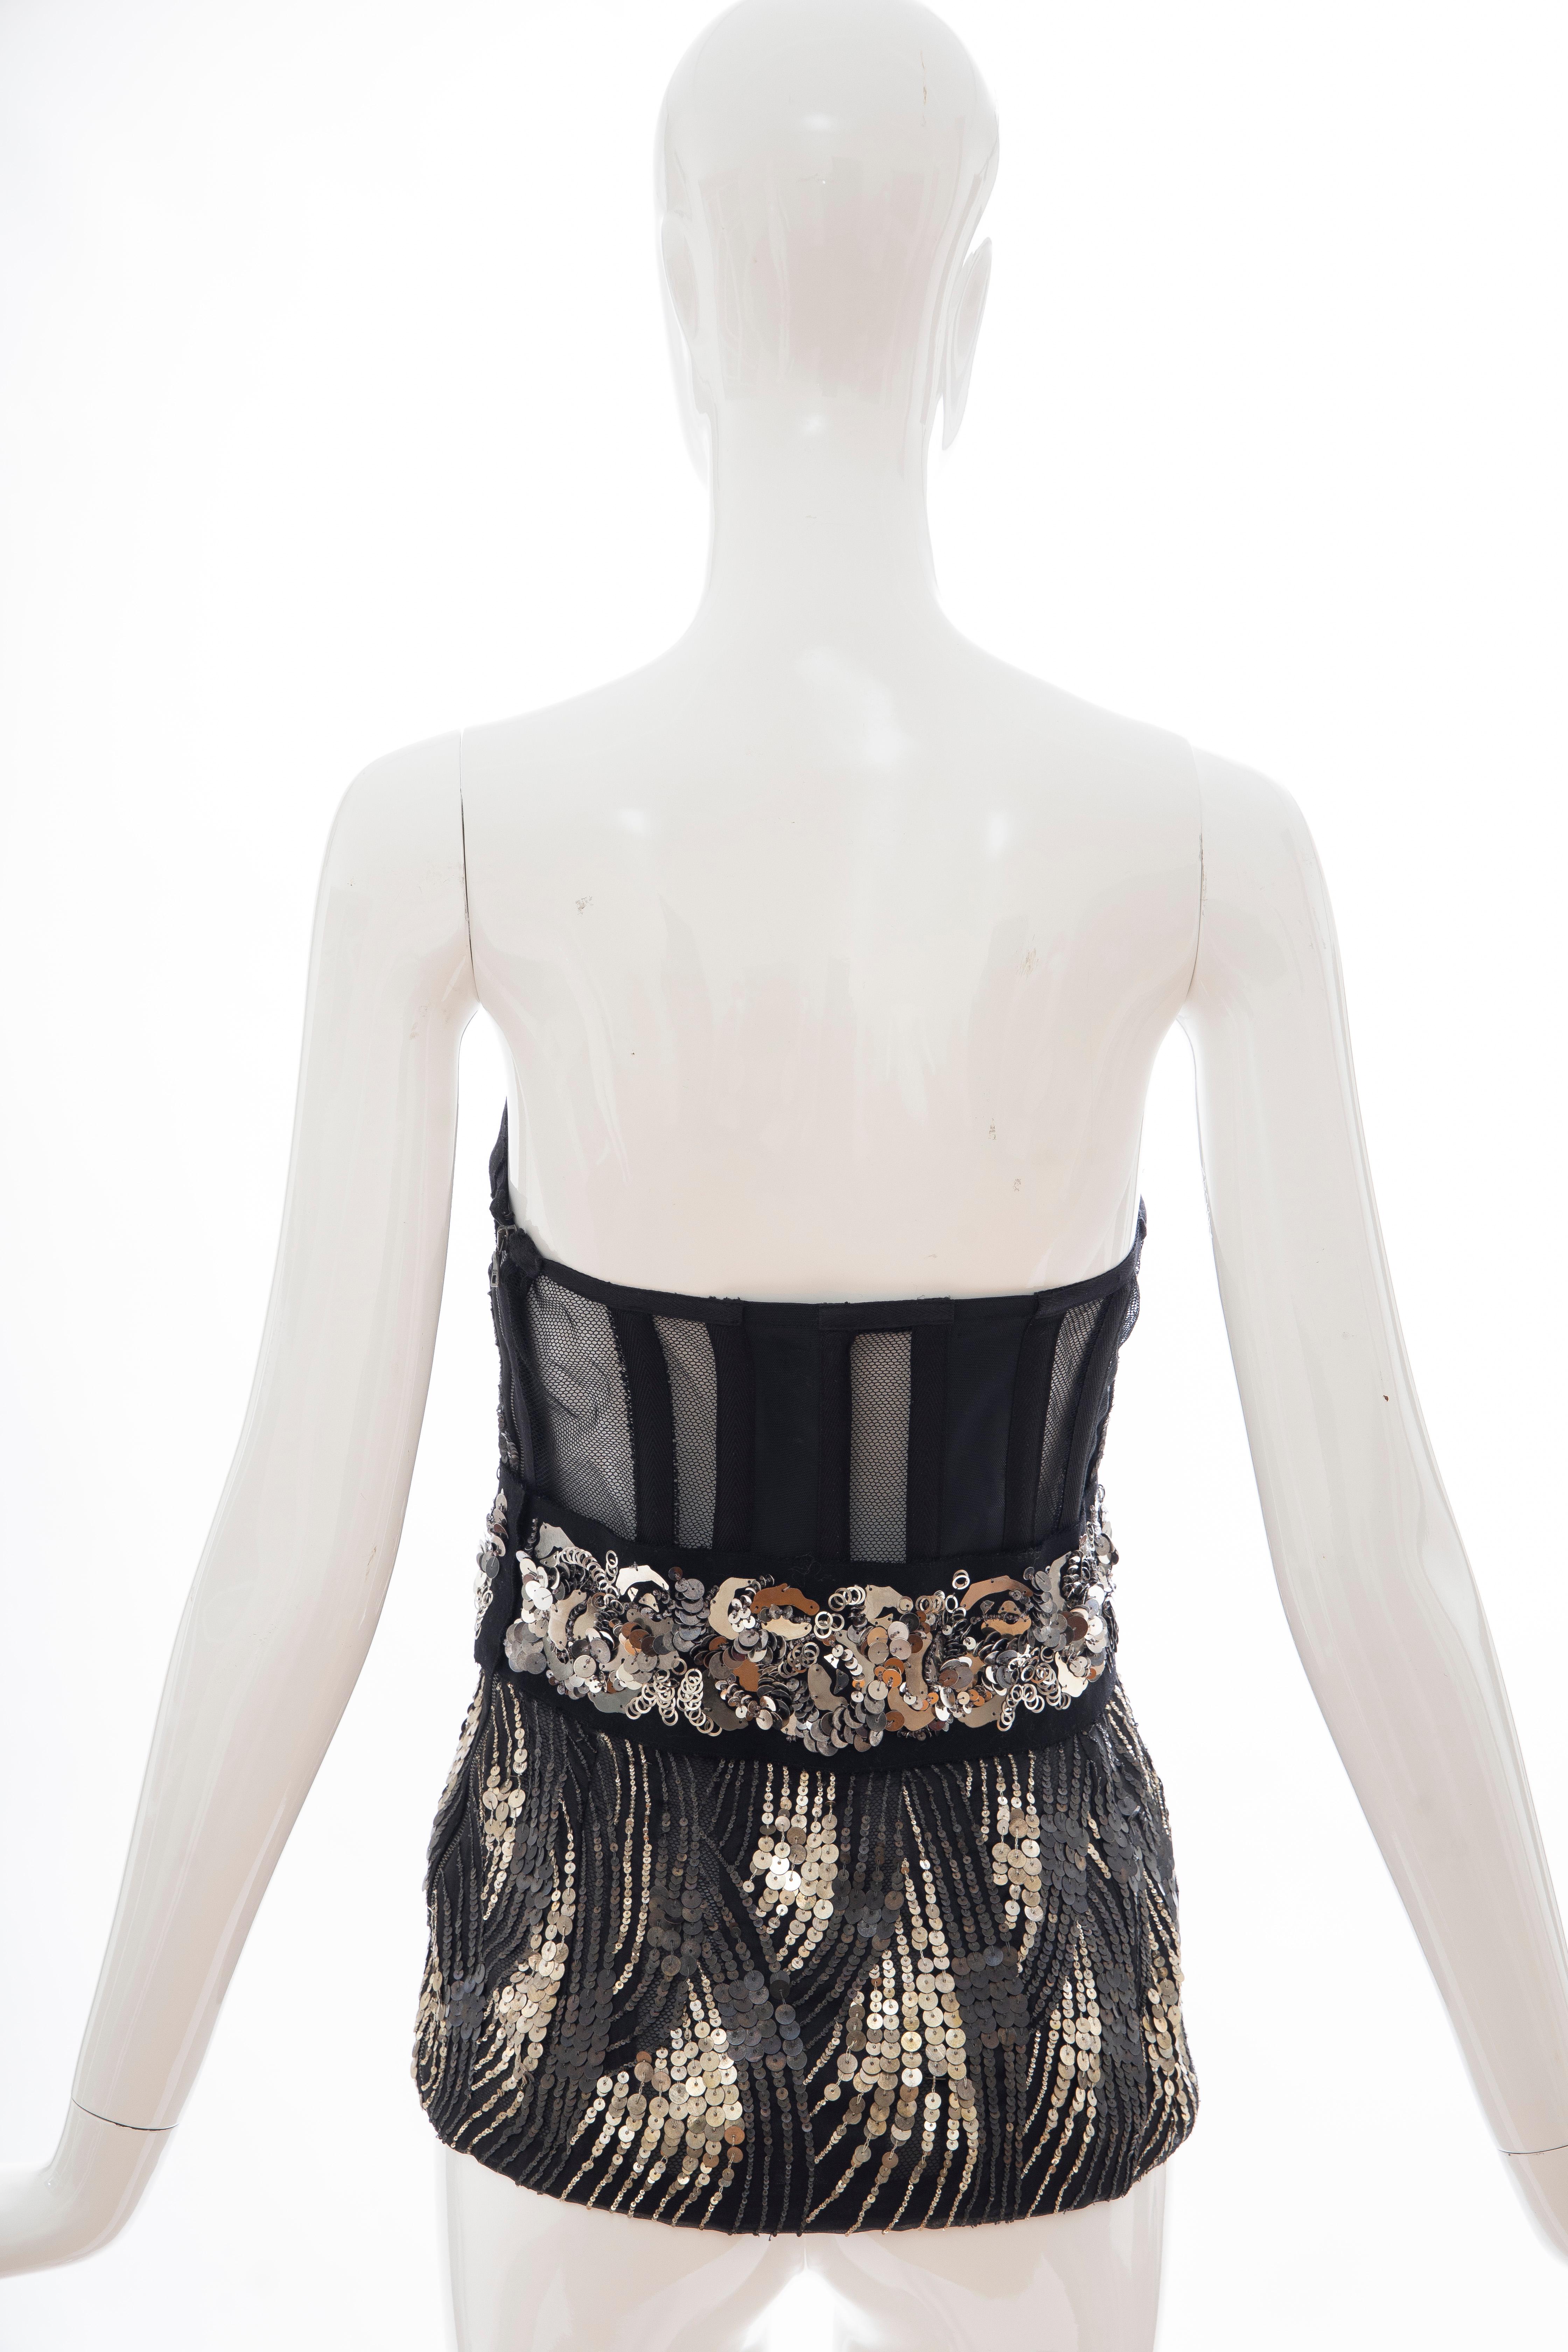 Prada Runway Black Strapless Embroidered Sequin Top, Fall 2006 In Excellent Condition For Sale In Cincinnati, OH